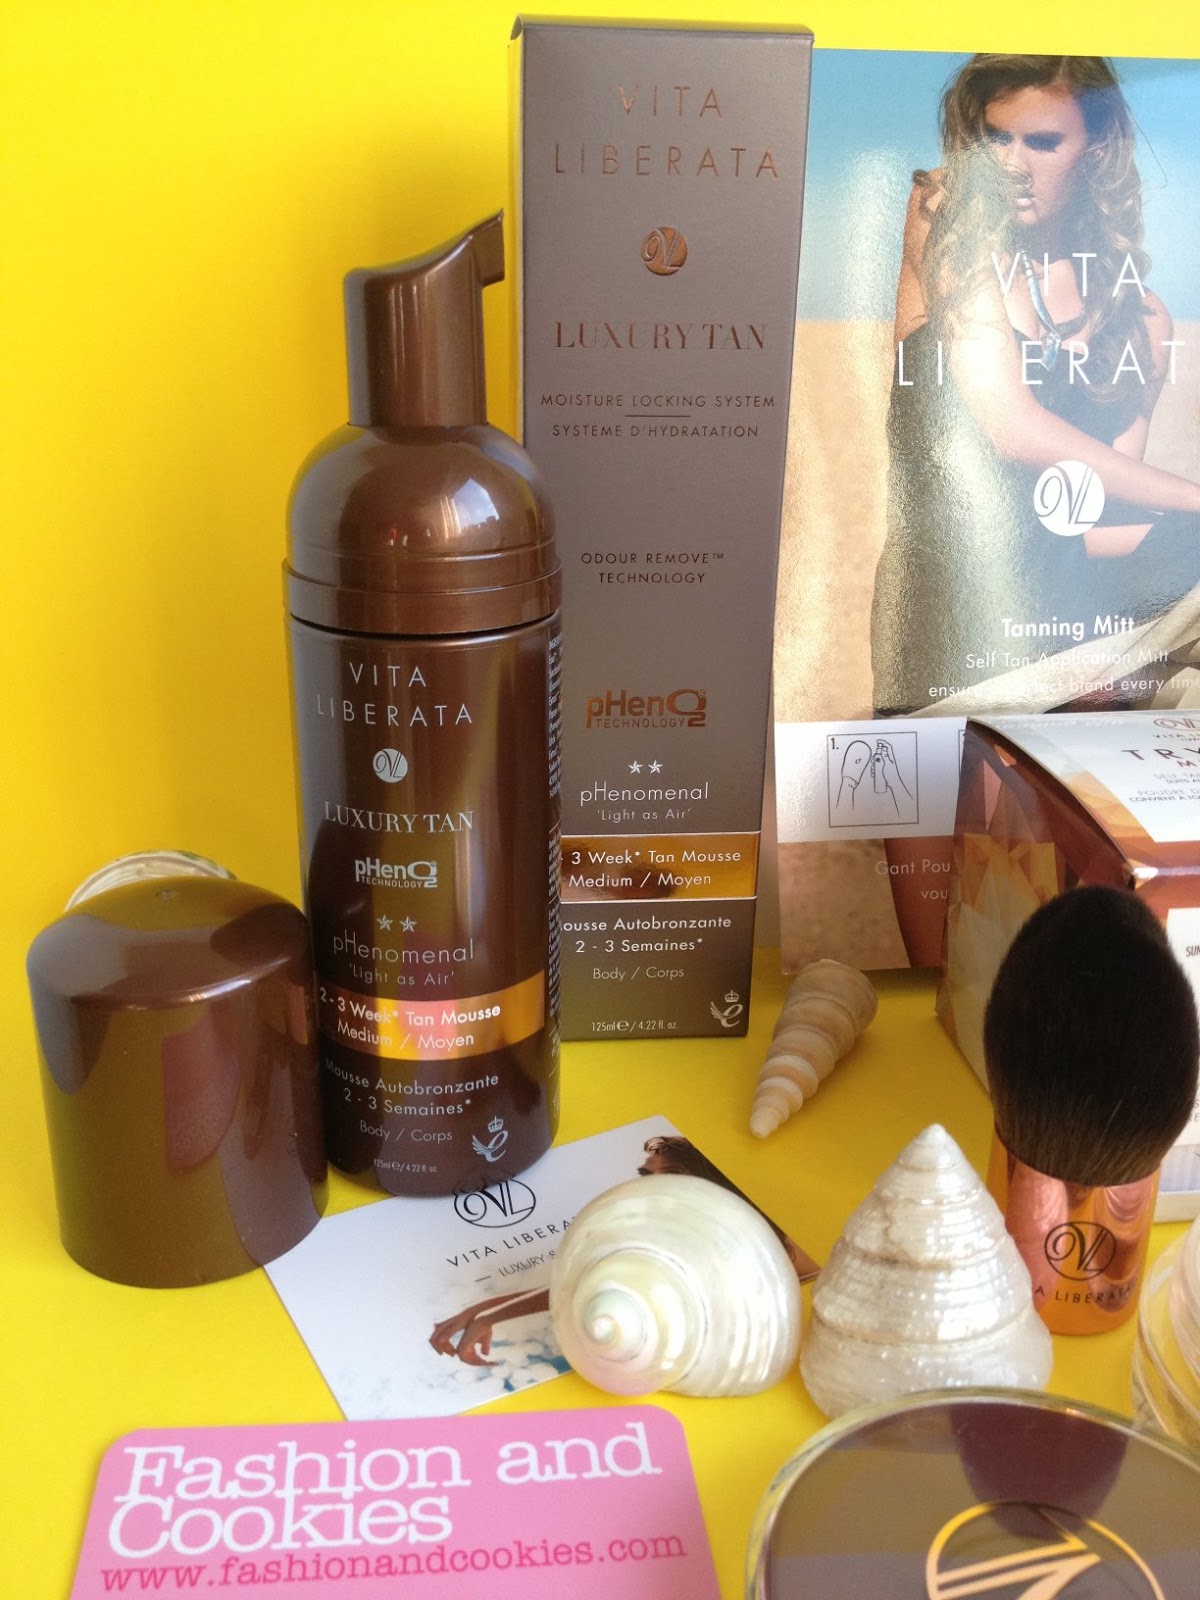 How to get a tan quickly and safely with Vita Liberata on Fashion and Cookies fashion and Beauty blog: Phenomenal Luxury Tan Mousse